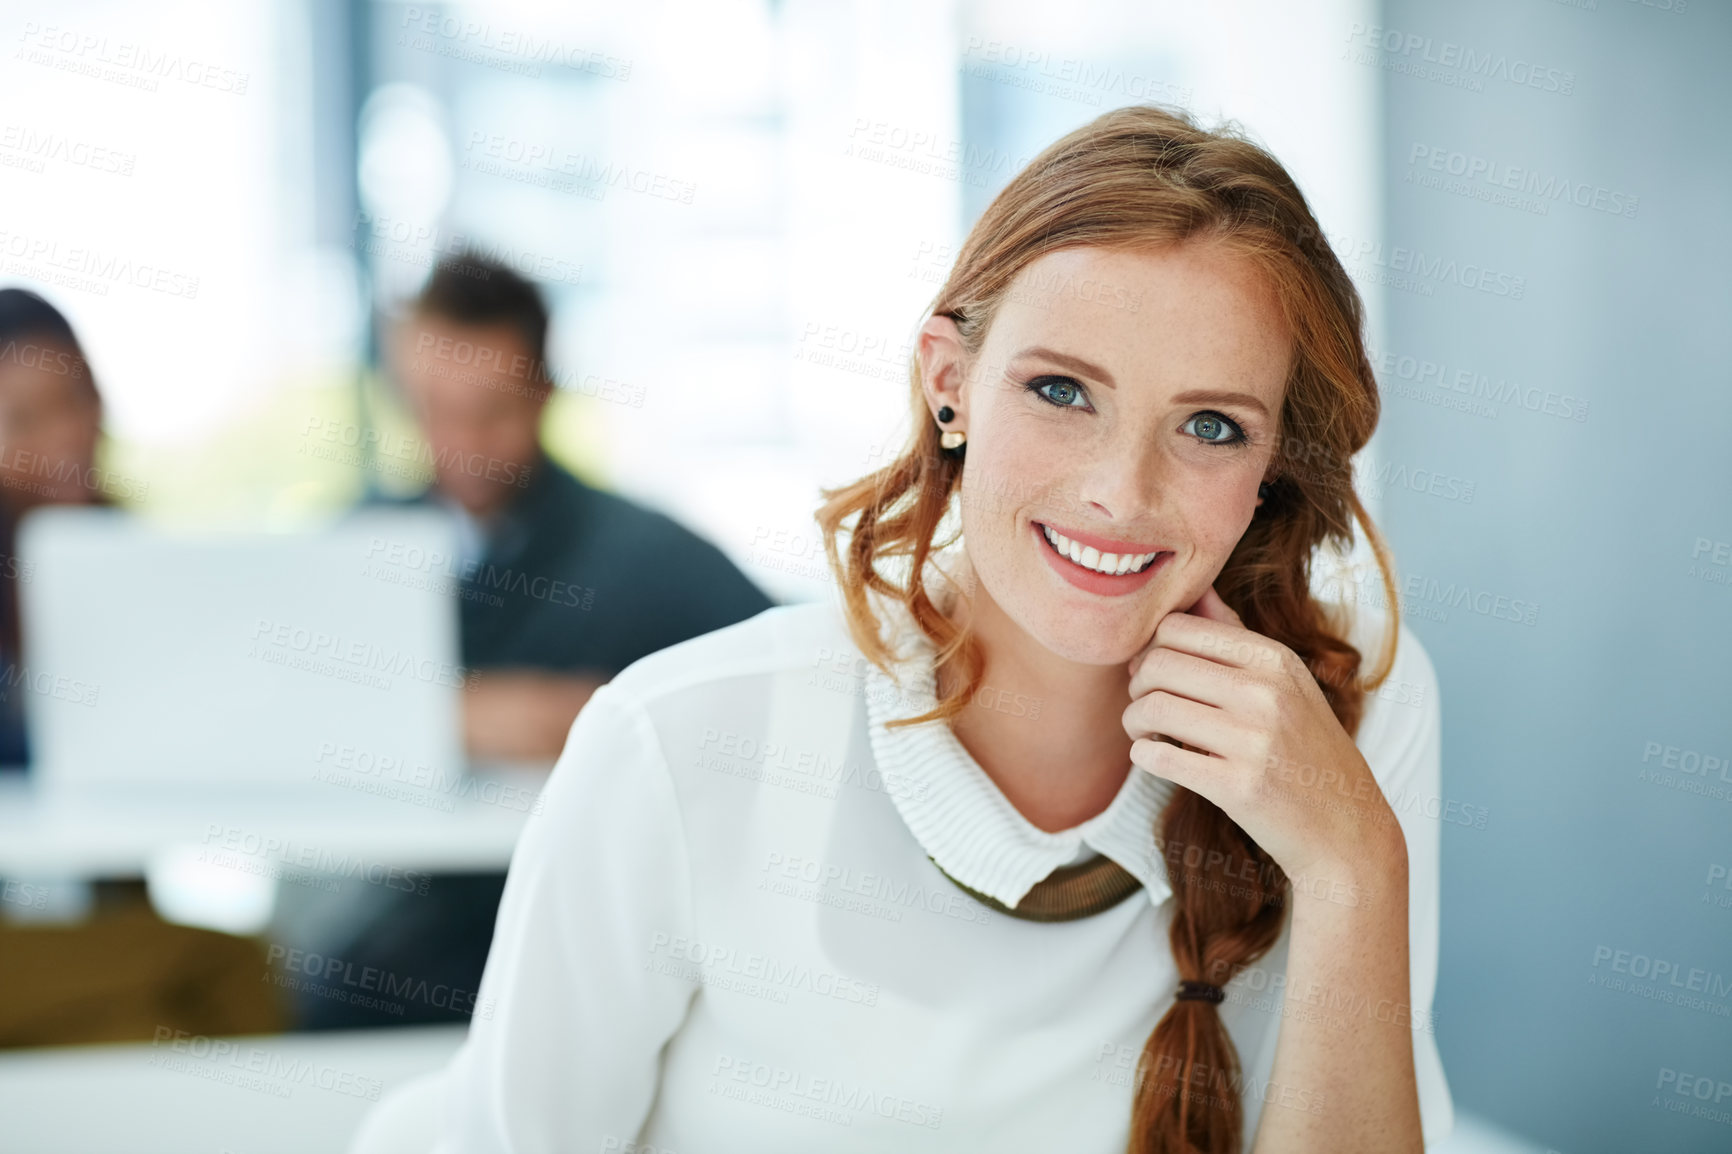 Buy stock photo Portrait of a young businesswoman sitting in an office with colleagues in the background